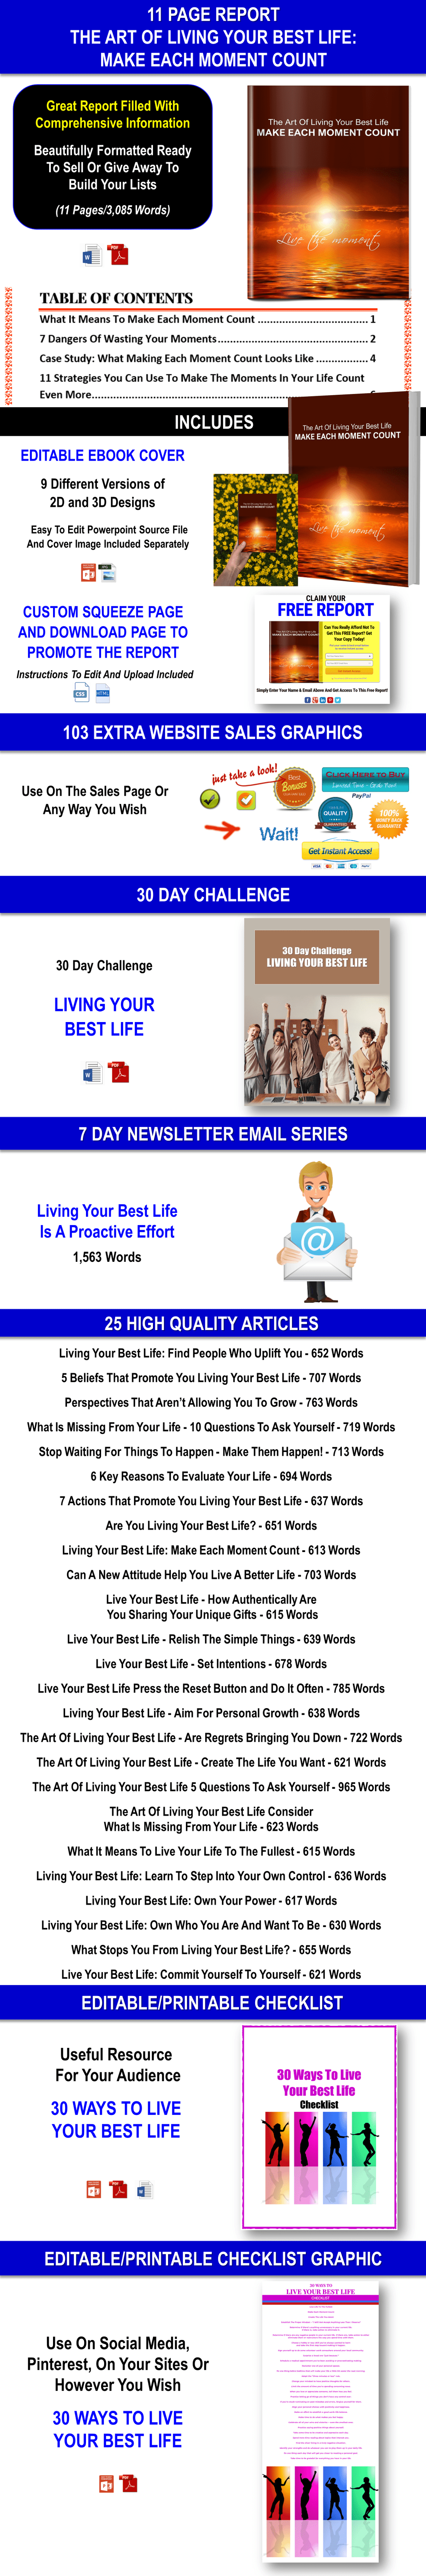 Art Of Living Your Best Life Content With PLR Rights